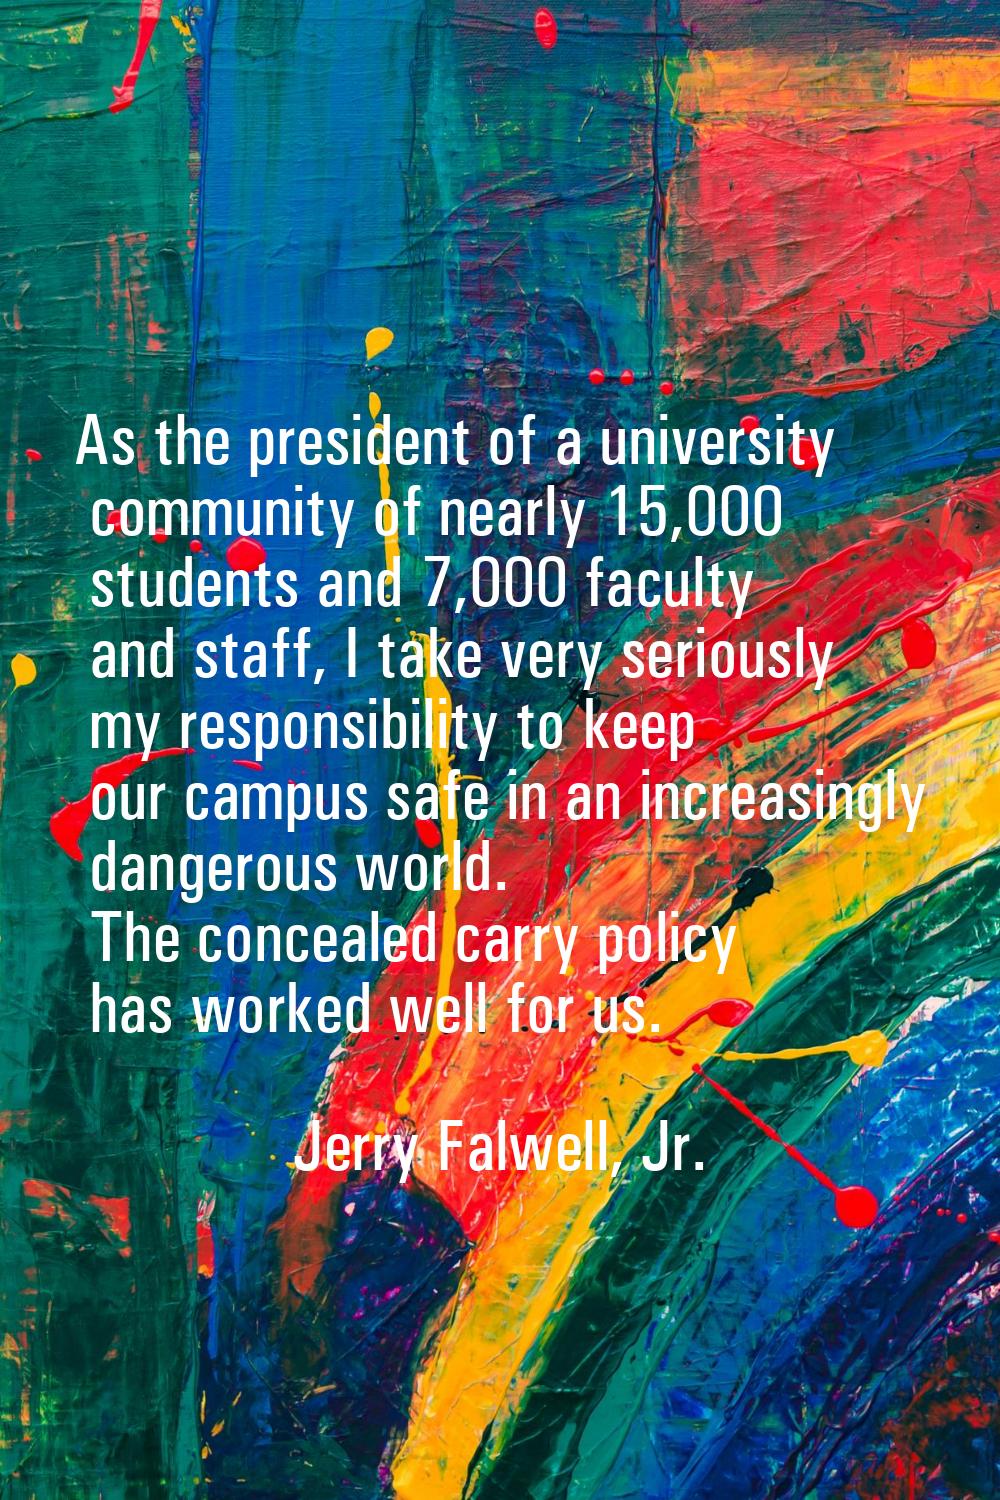 As the president of a university community of nearly 15,000 students and 7,000 faculty and staff, I